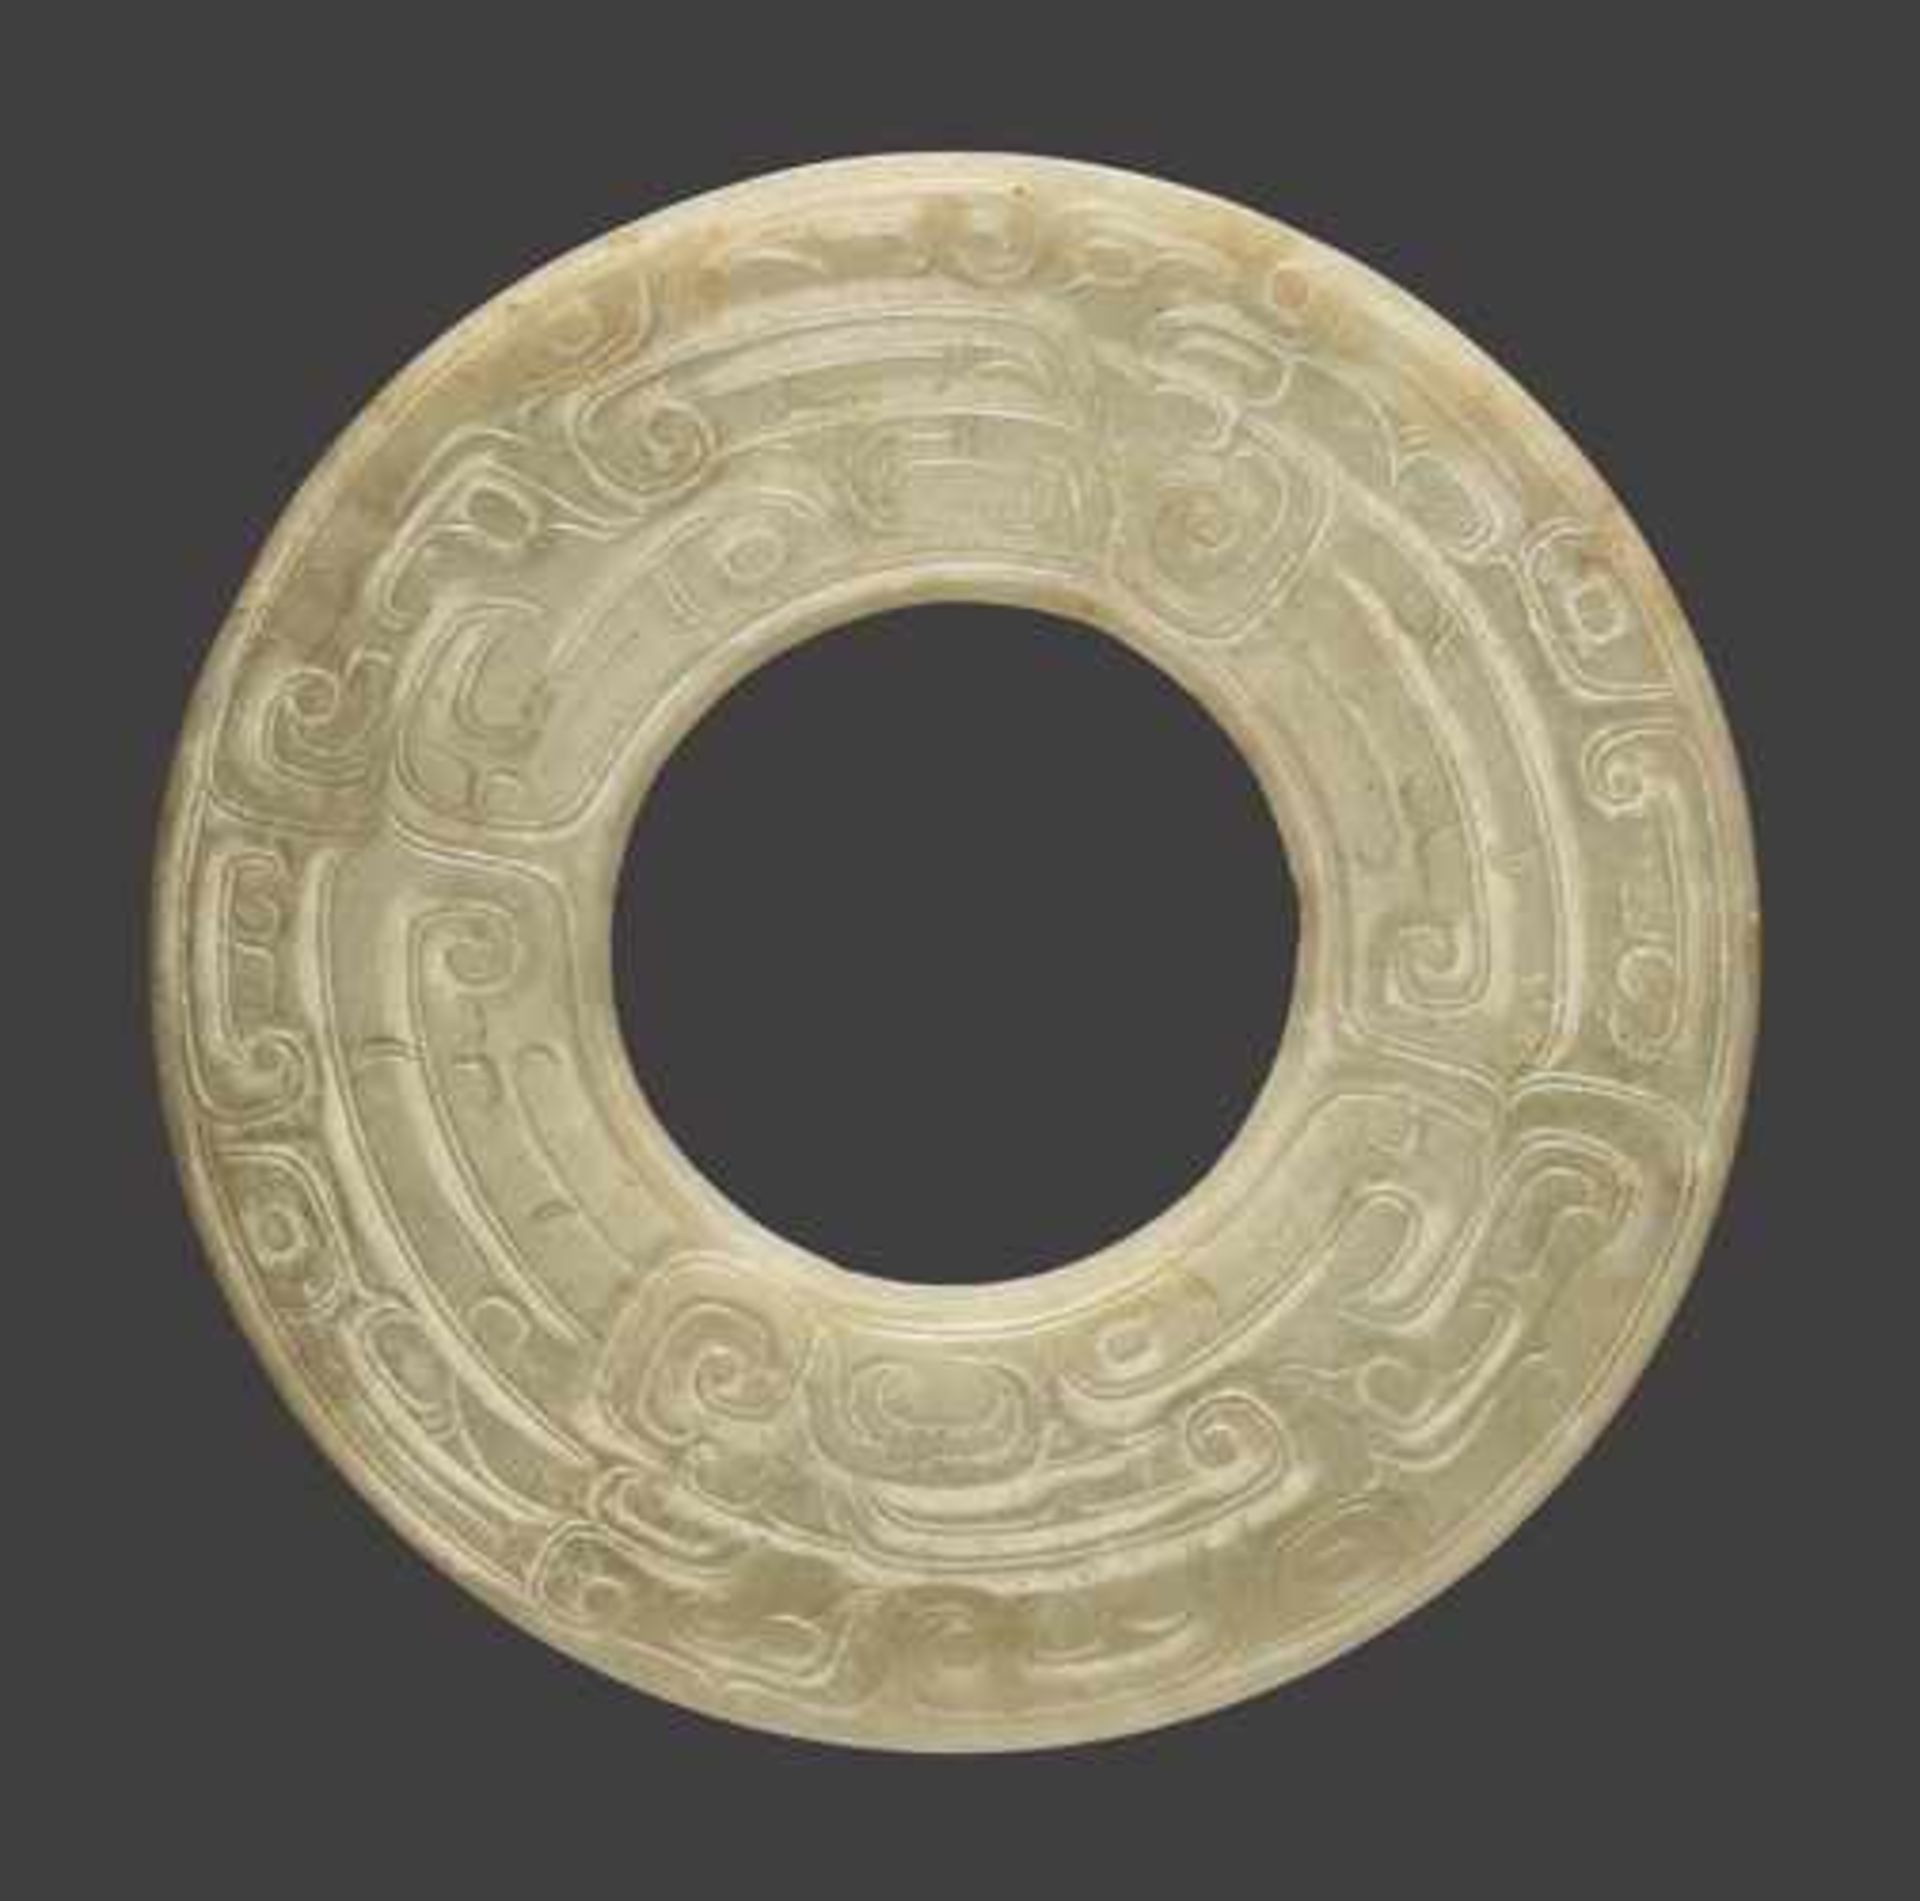 A LARGE DISC IN LIGHT GREEN JADE WITH A DOUBLE ONELEGGED DRAGON (KUI) DESIGN Jade, China. Late